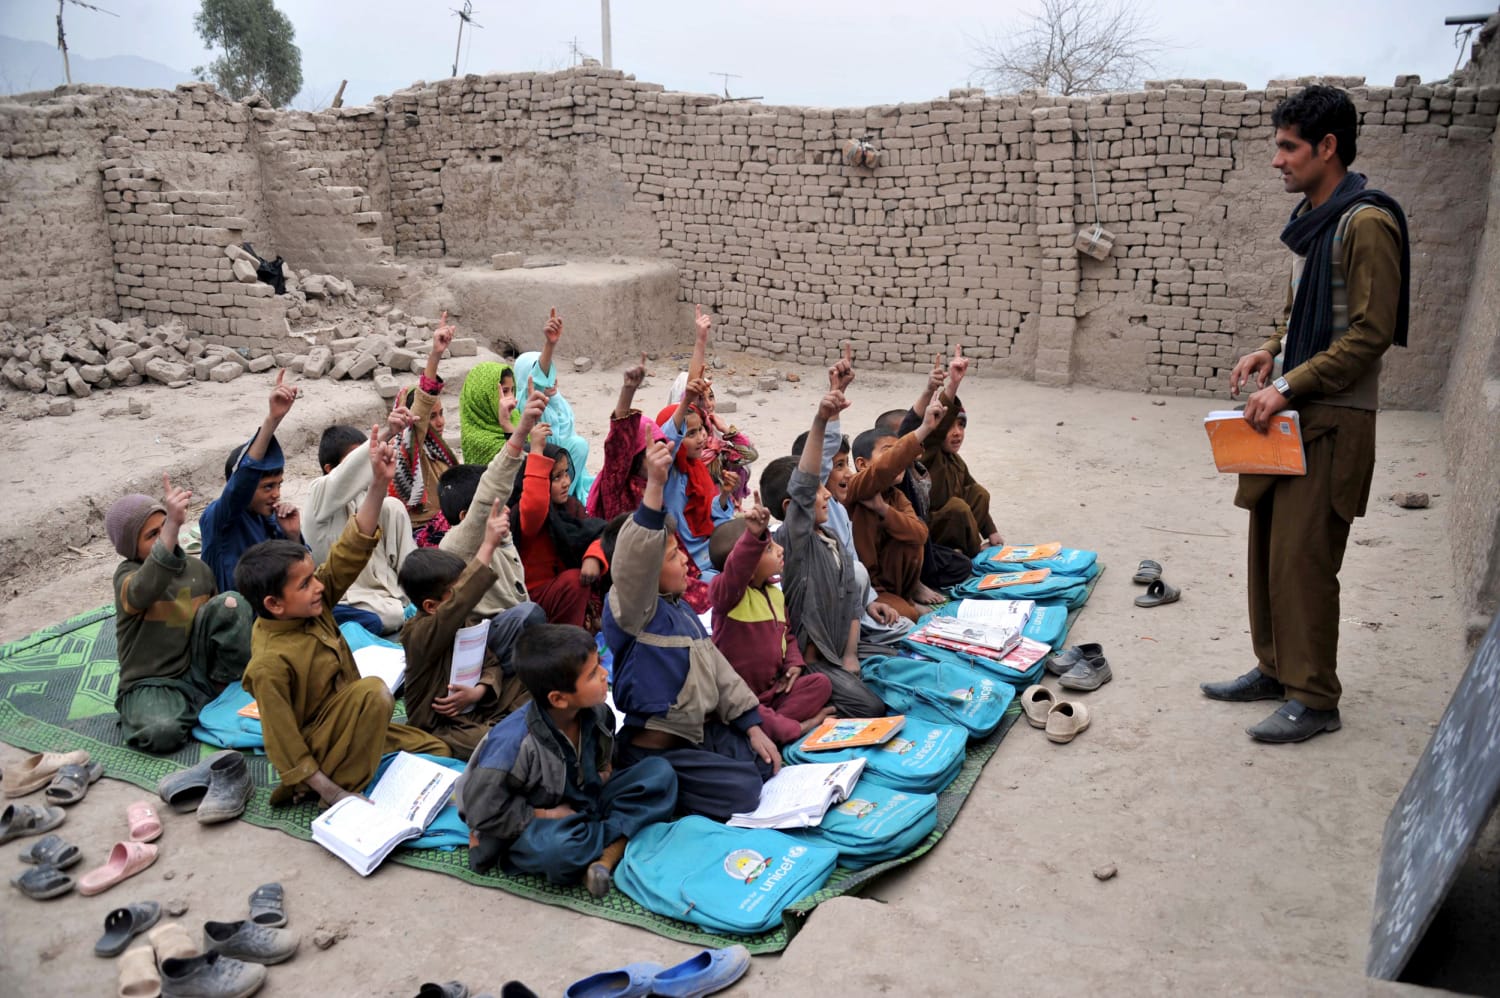 Nearly half of Afghan children don't go to school, with girls disproportionately affected